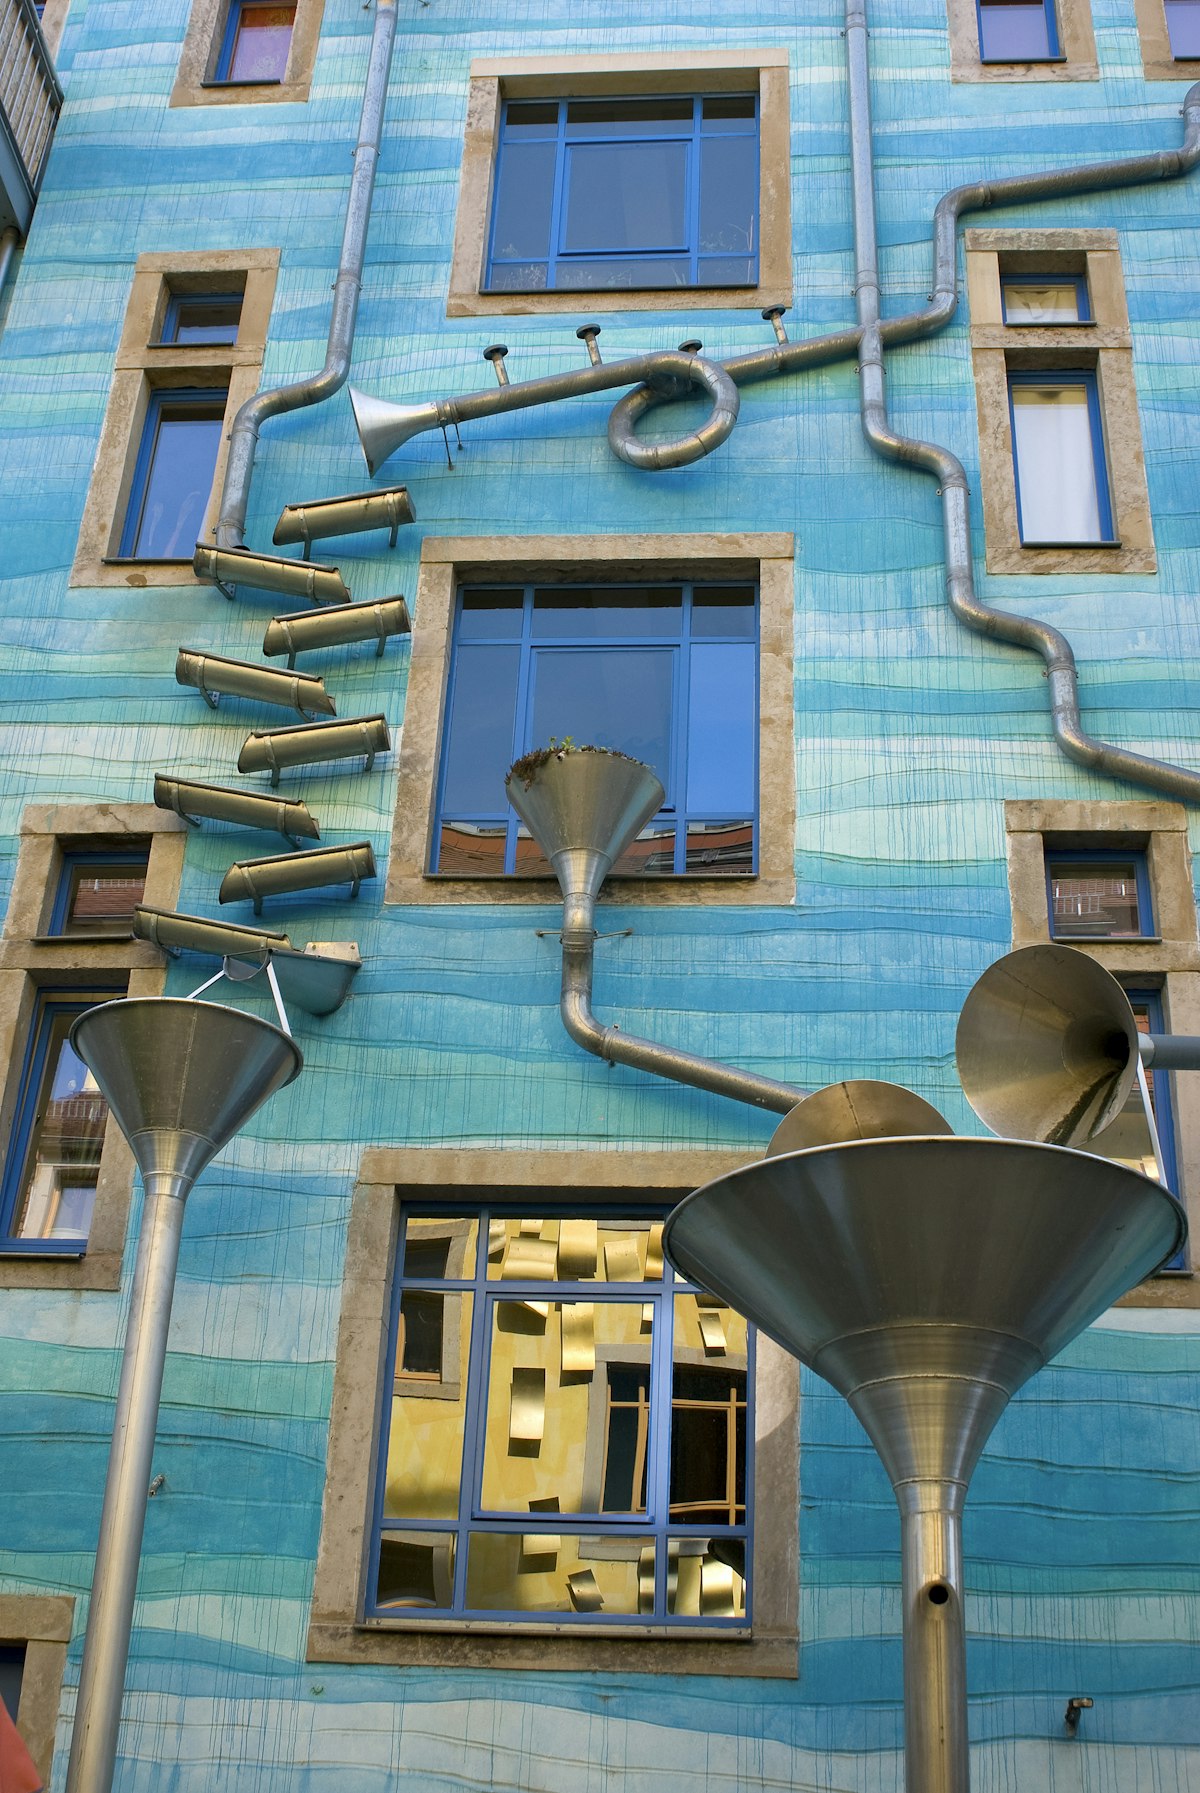 Germany, Saxony State, Dresden, drainpipes on a facade of Kunsthof Passage